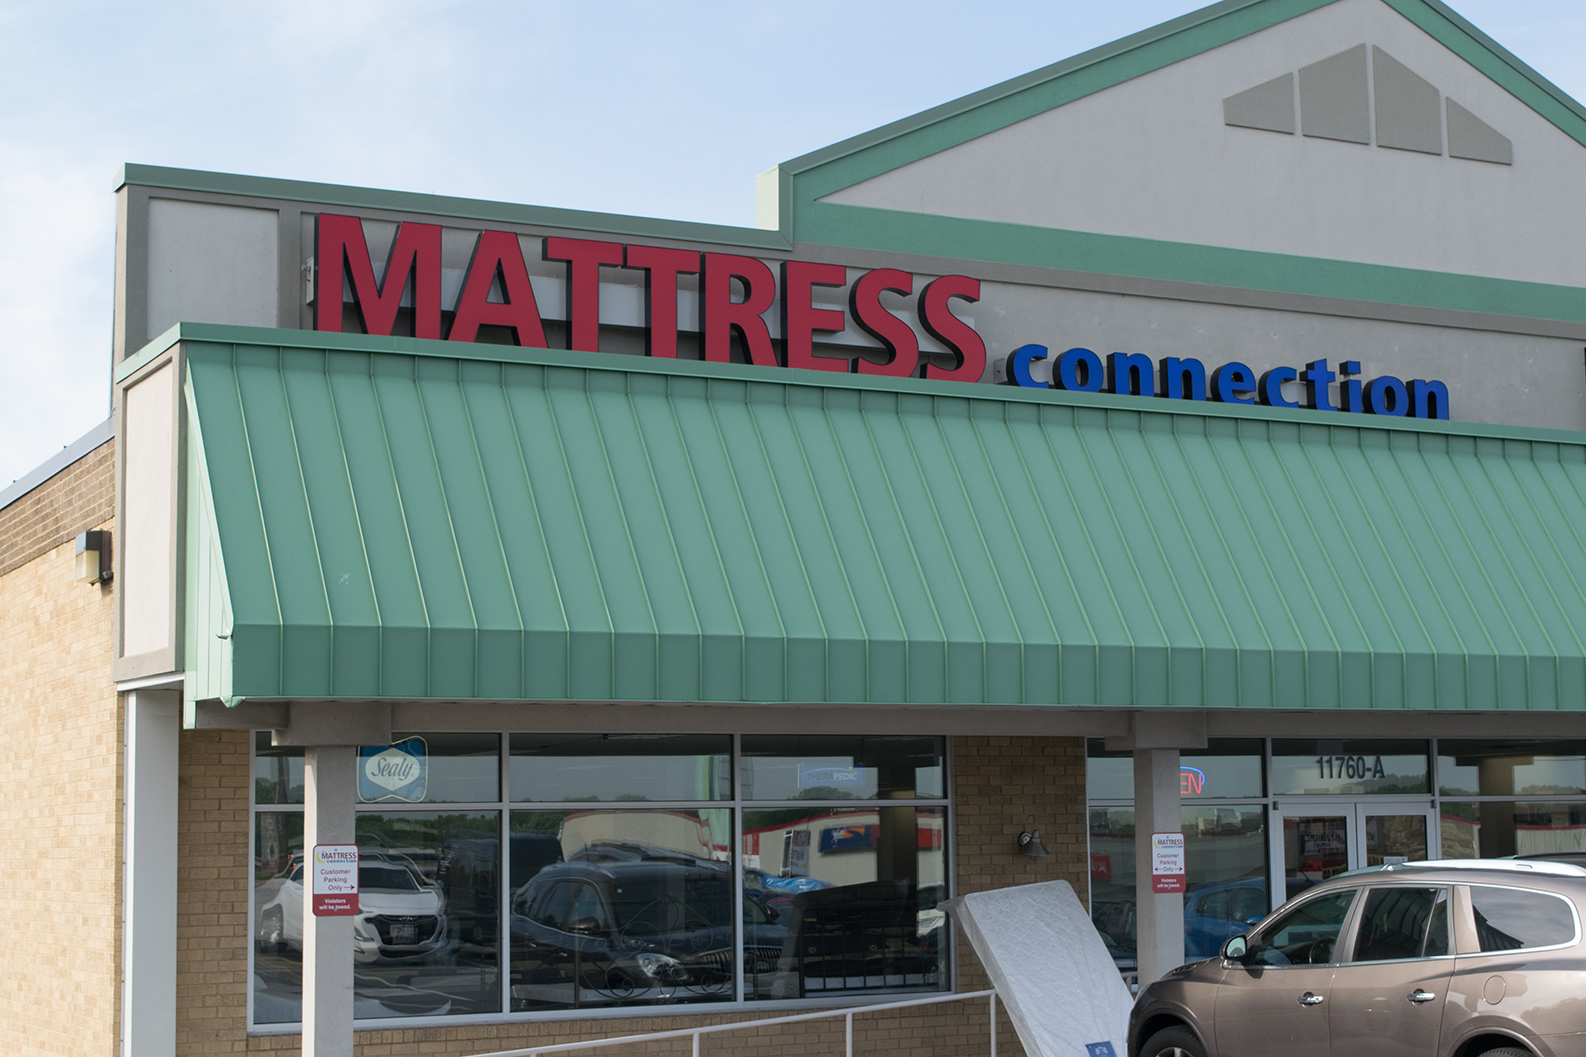 The Mattress Connection of Rockville